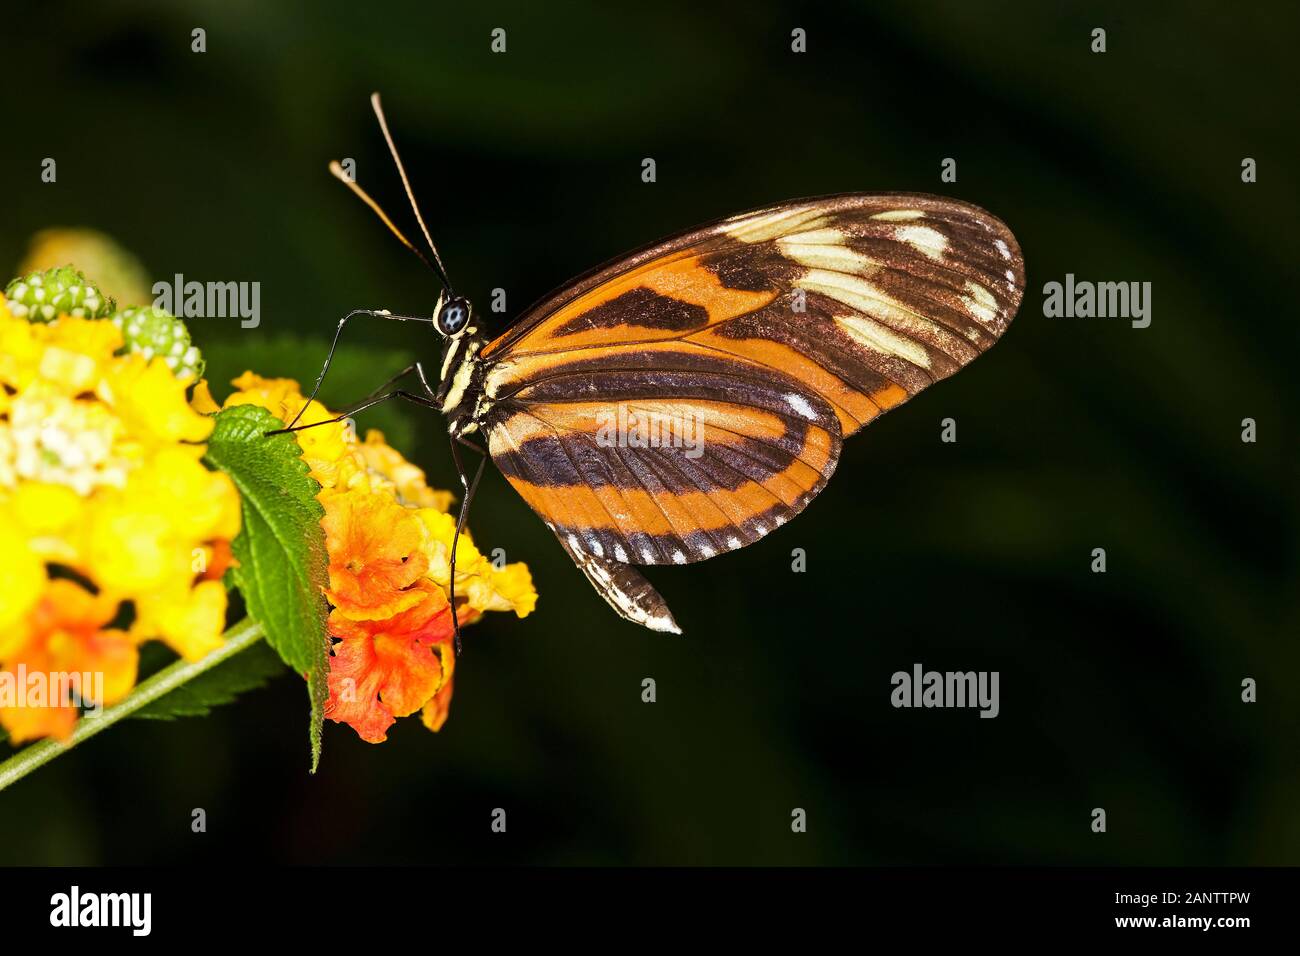 Eueides butterfly, eueides isabella, Adult standing on Flower Stock Photo